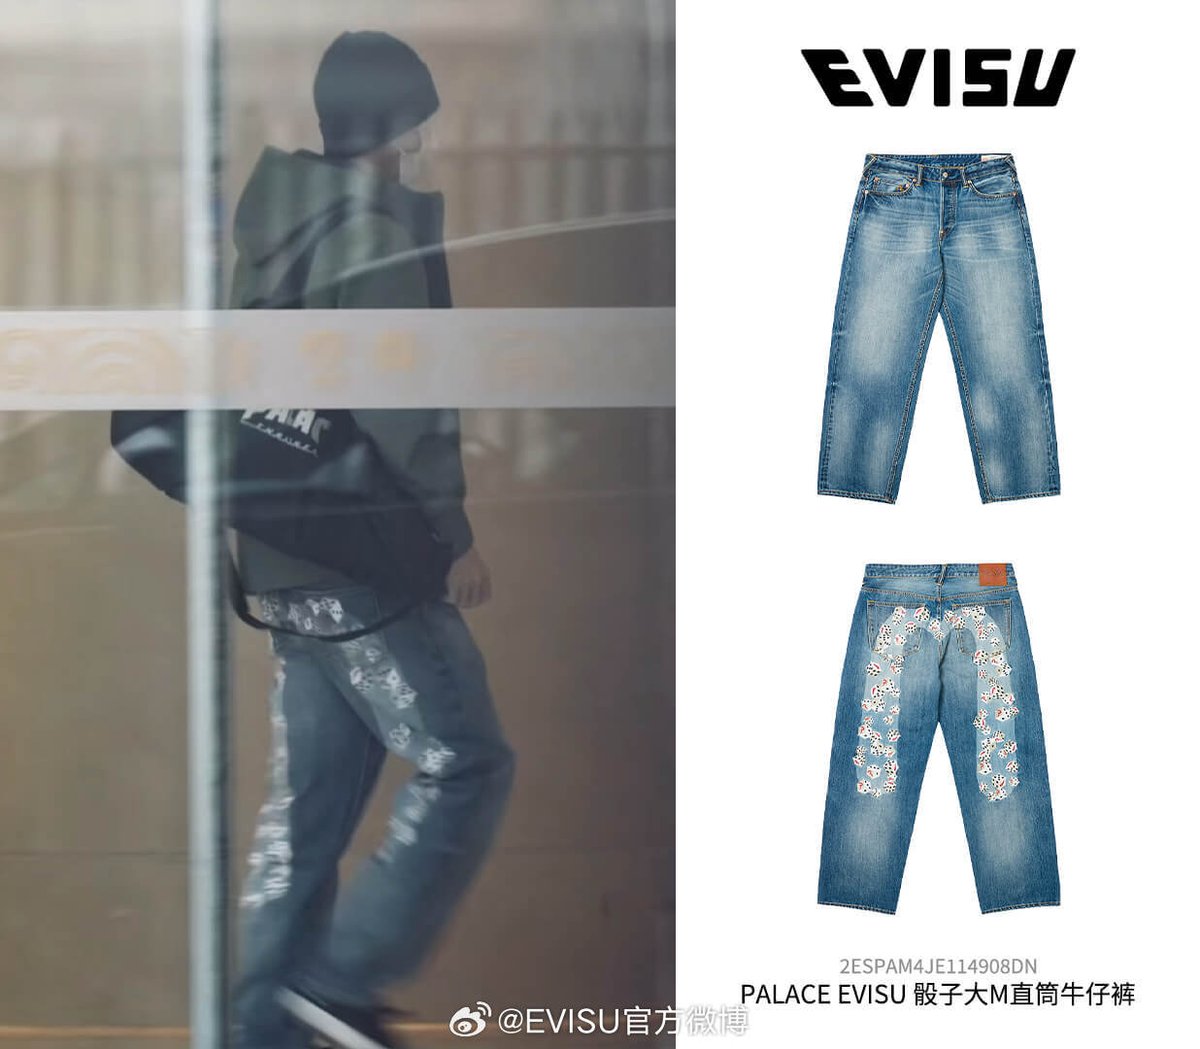 Evisu update 🎲PALACE EVISU 4.0 collaboration is coming! Look who has put it on first #WangYibo